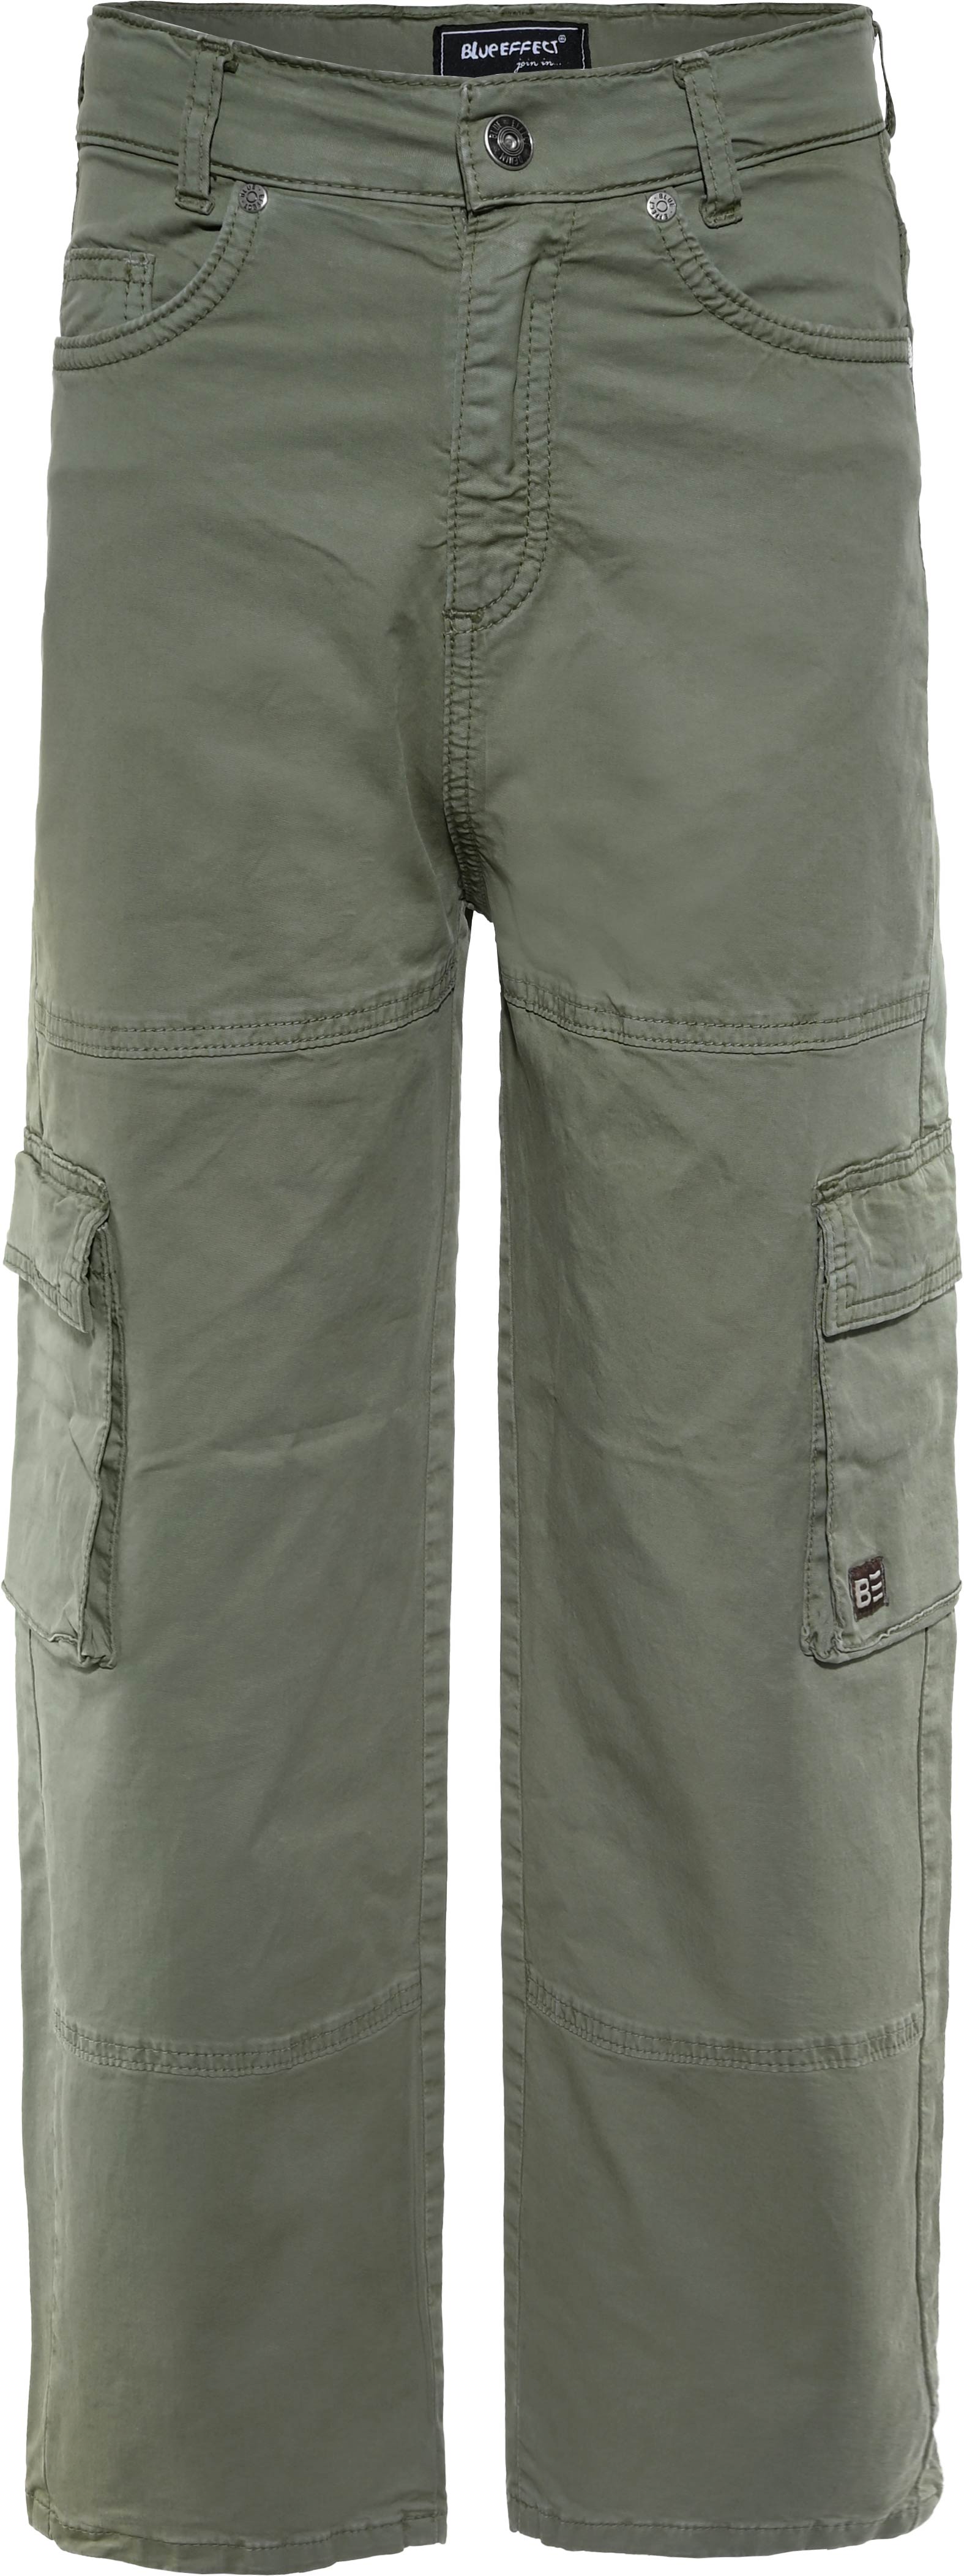 2861-Boys Super Baggy Pant available in slim, normal